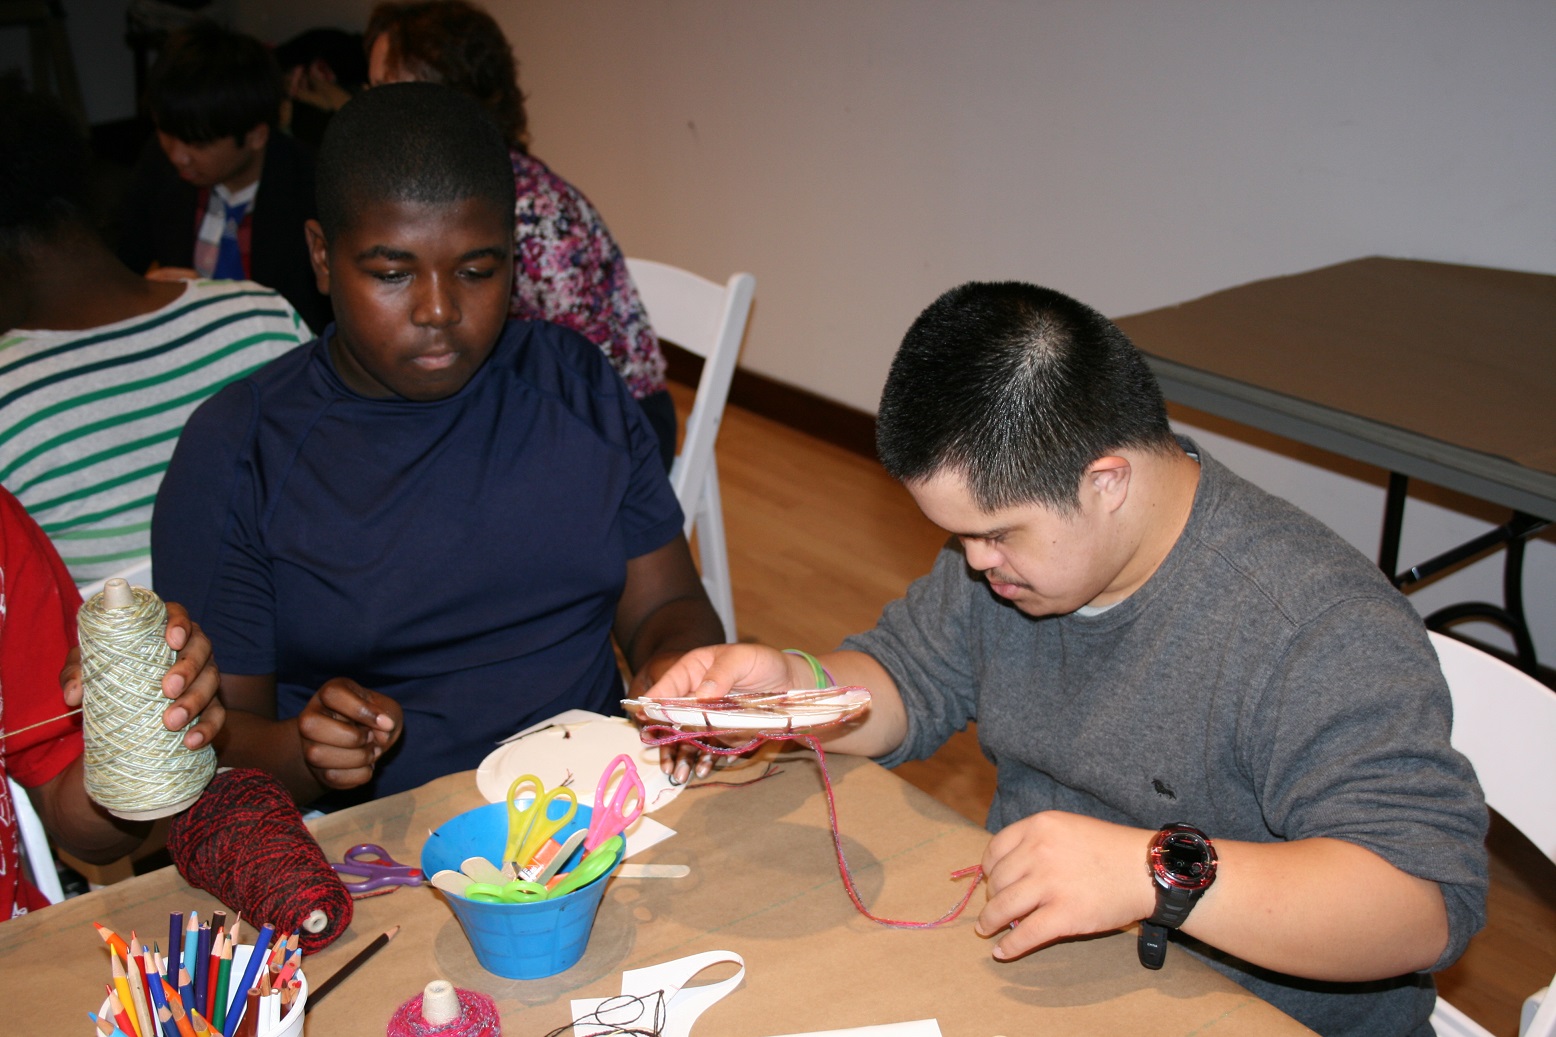 After touring MOCA and seeing artwork by Gabriel Dawes, Salem Middle students create their own designs using thread.